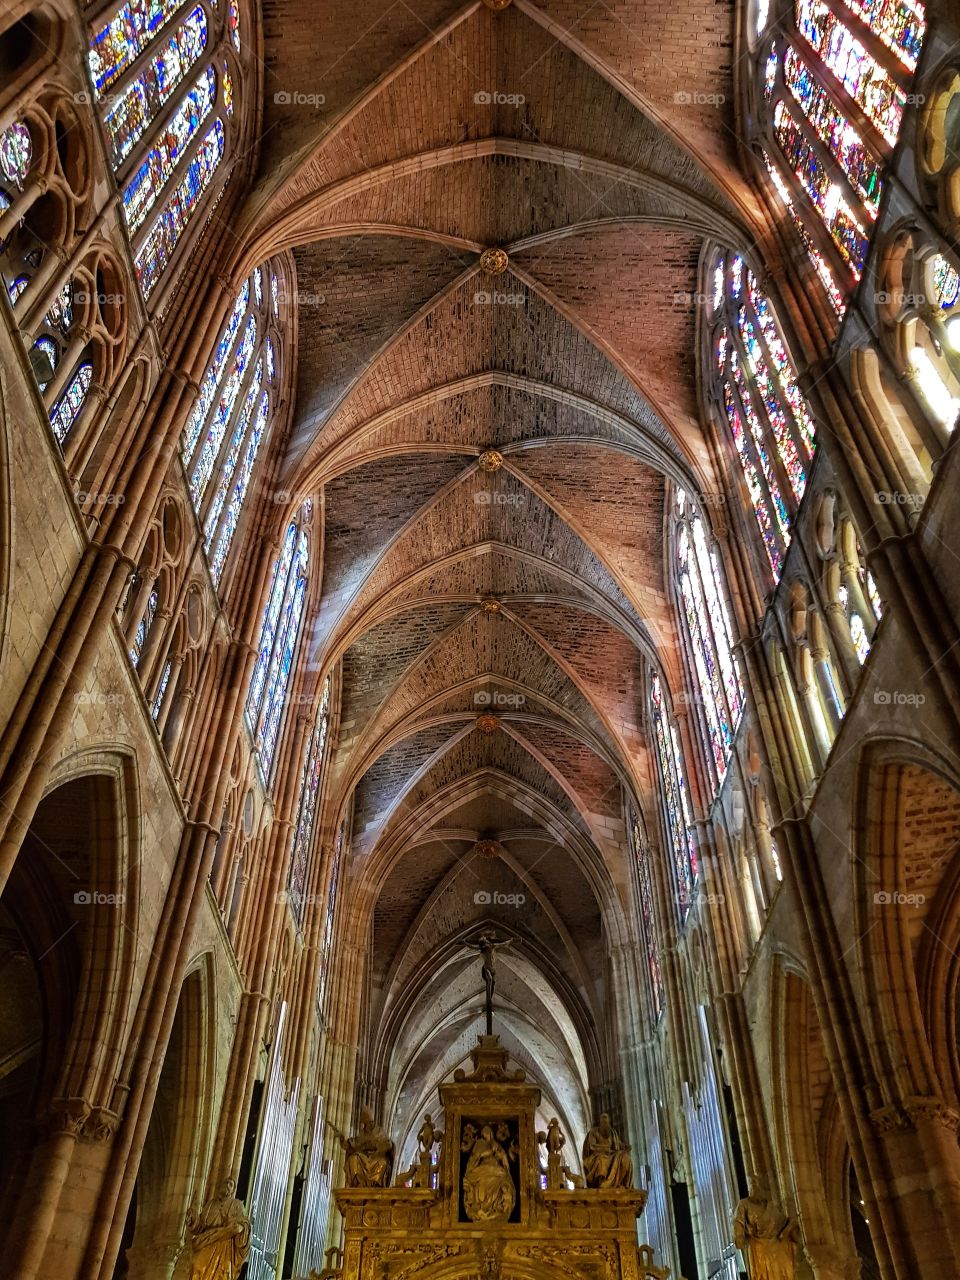 León Cathedral, Spain